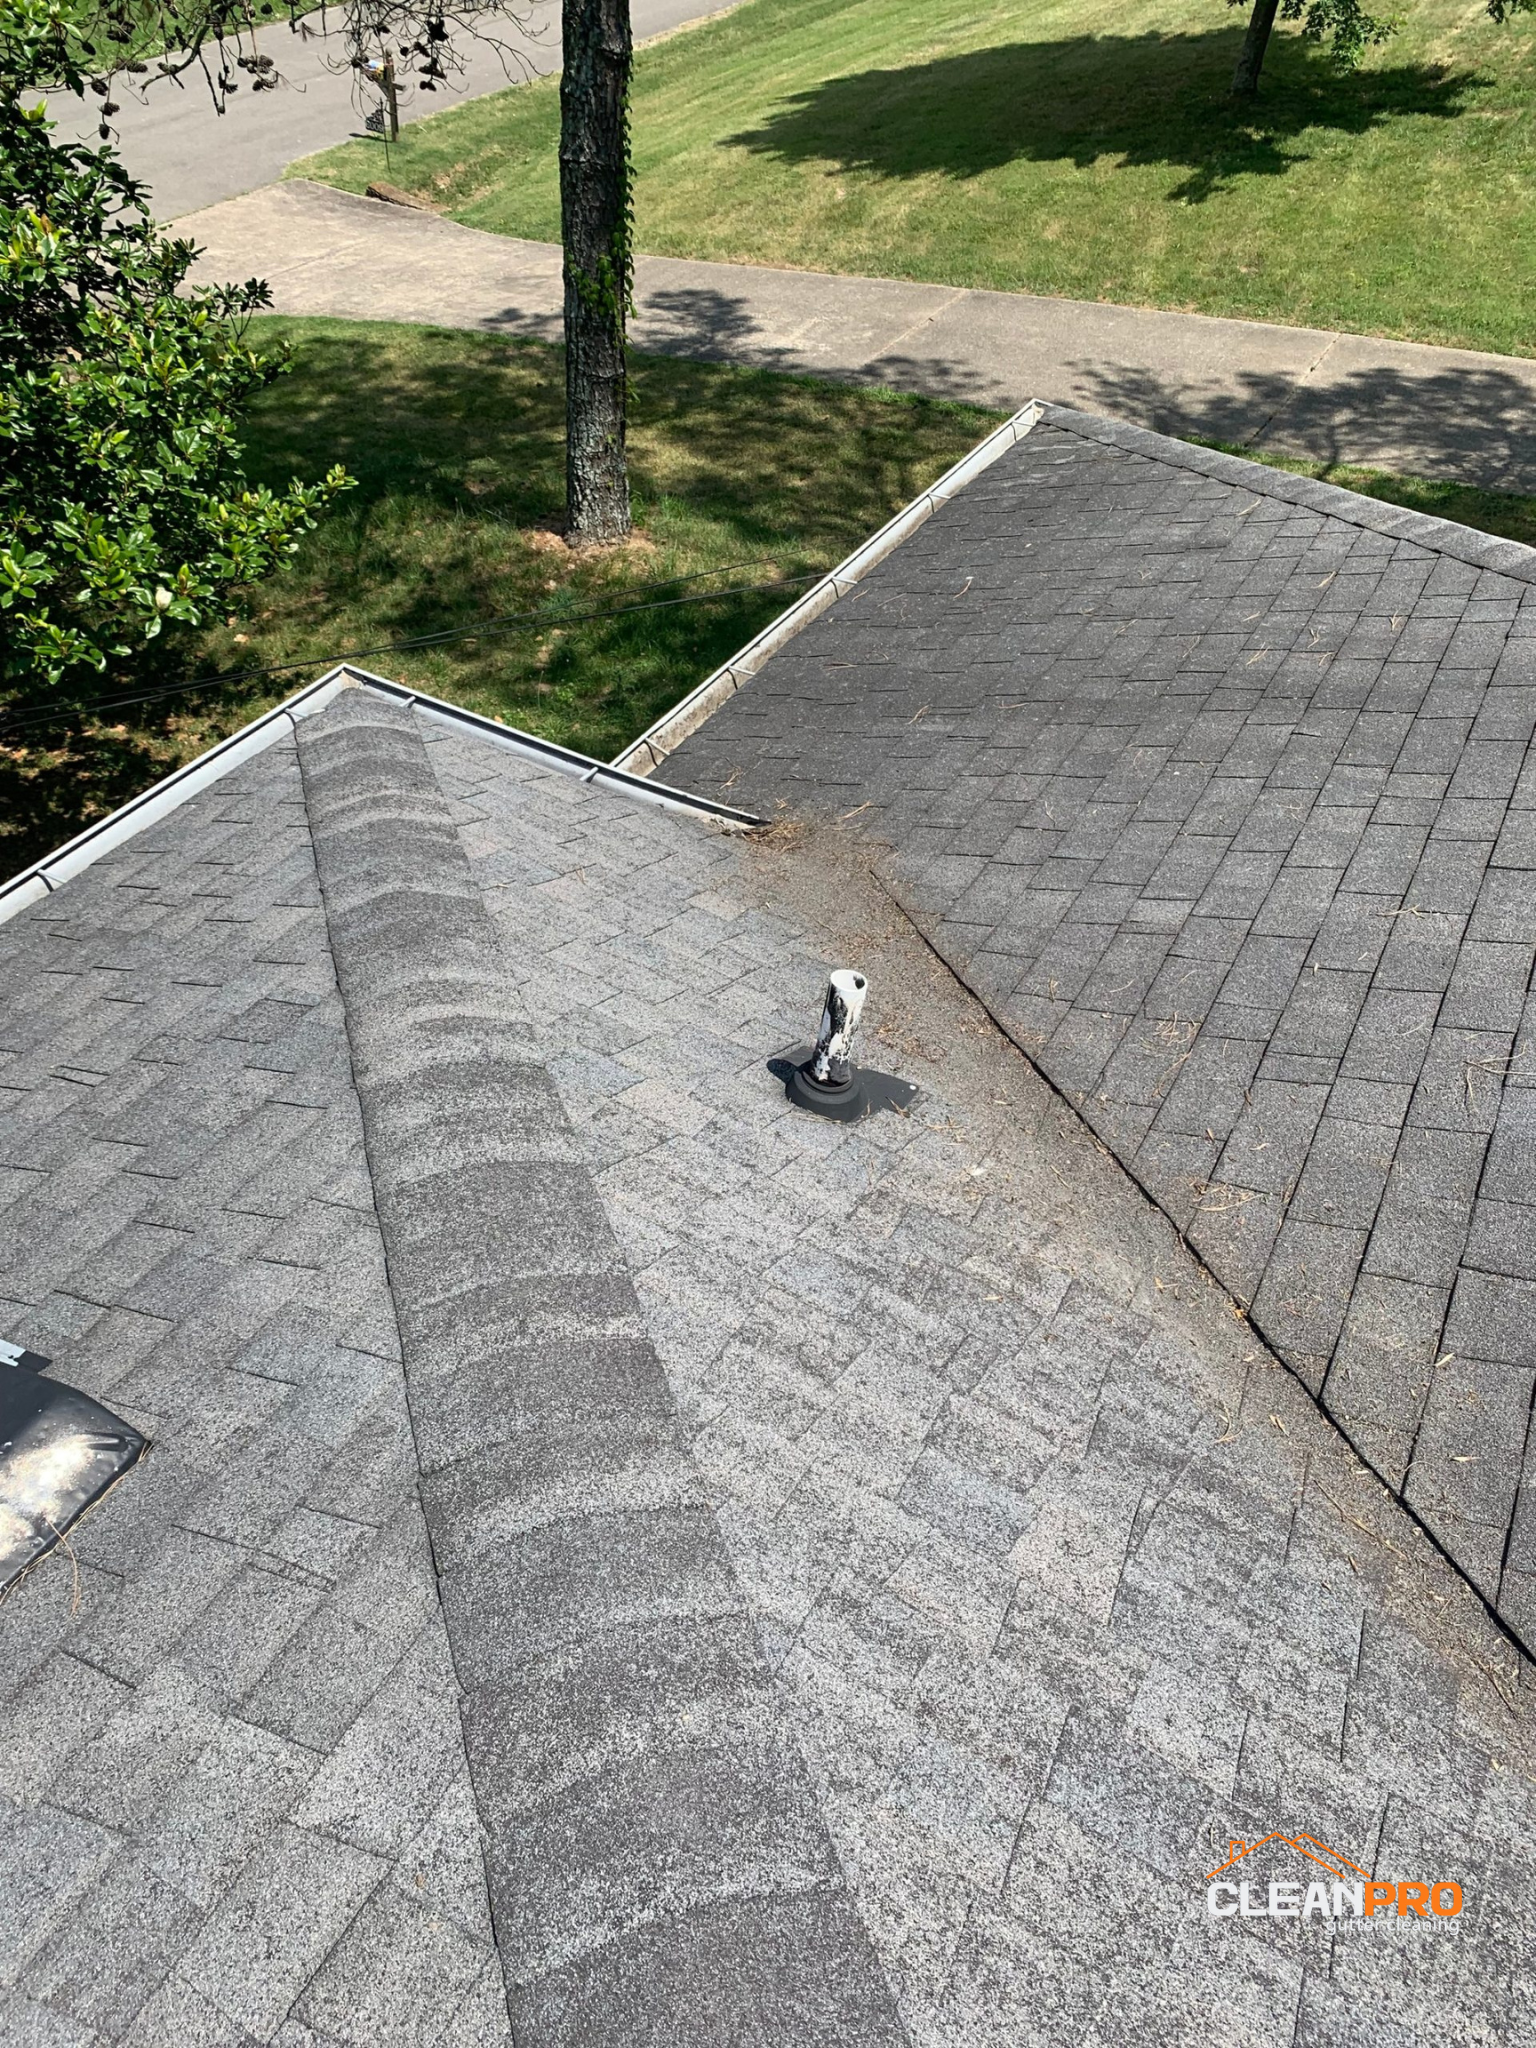 Quality Gutter Cleaning in Sarasota FL